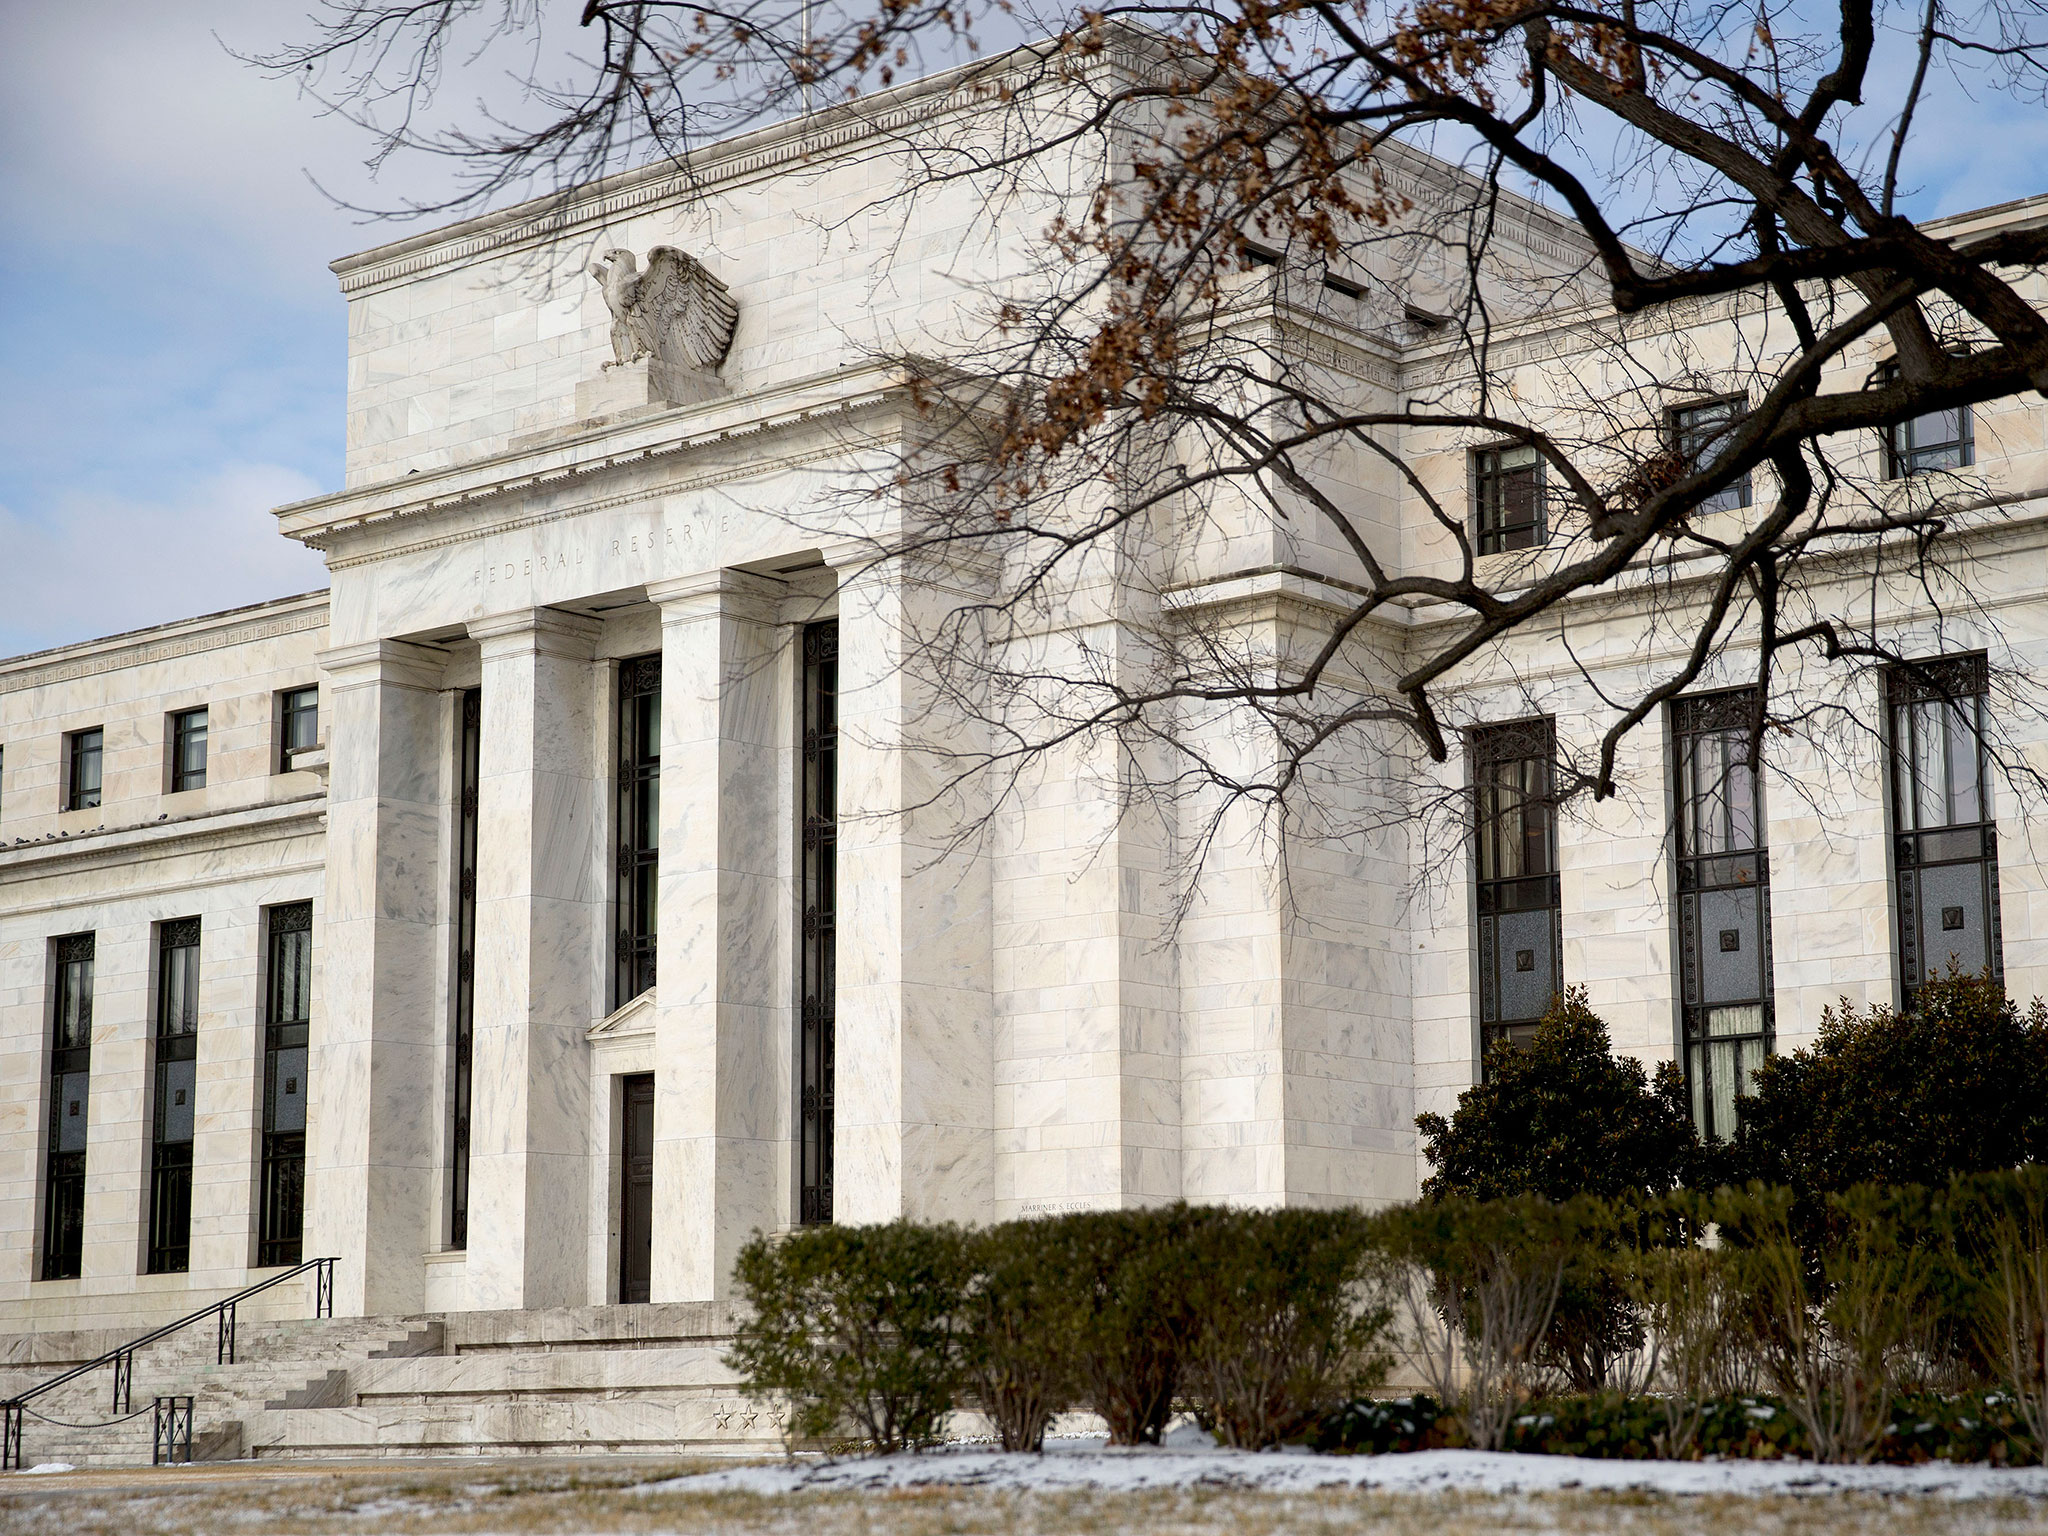 The Marriner S. Eccles Federal Reserve building in Washington, D.C., on Jan. 27, 2015.
